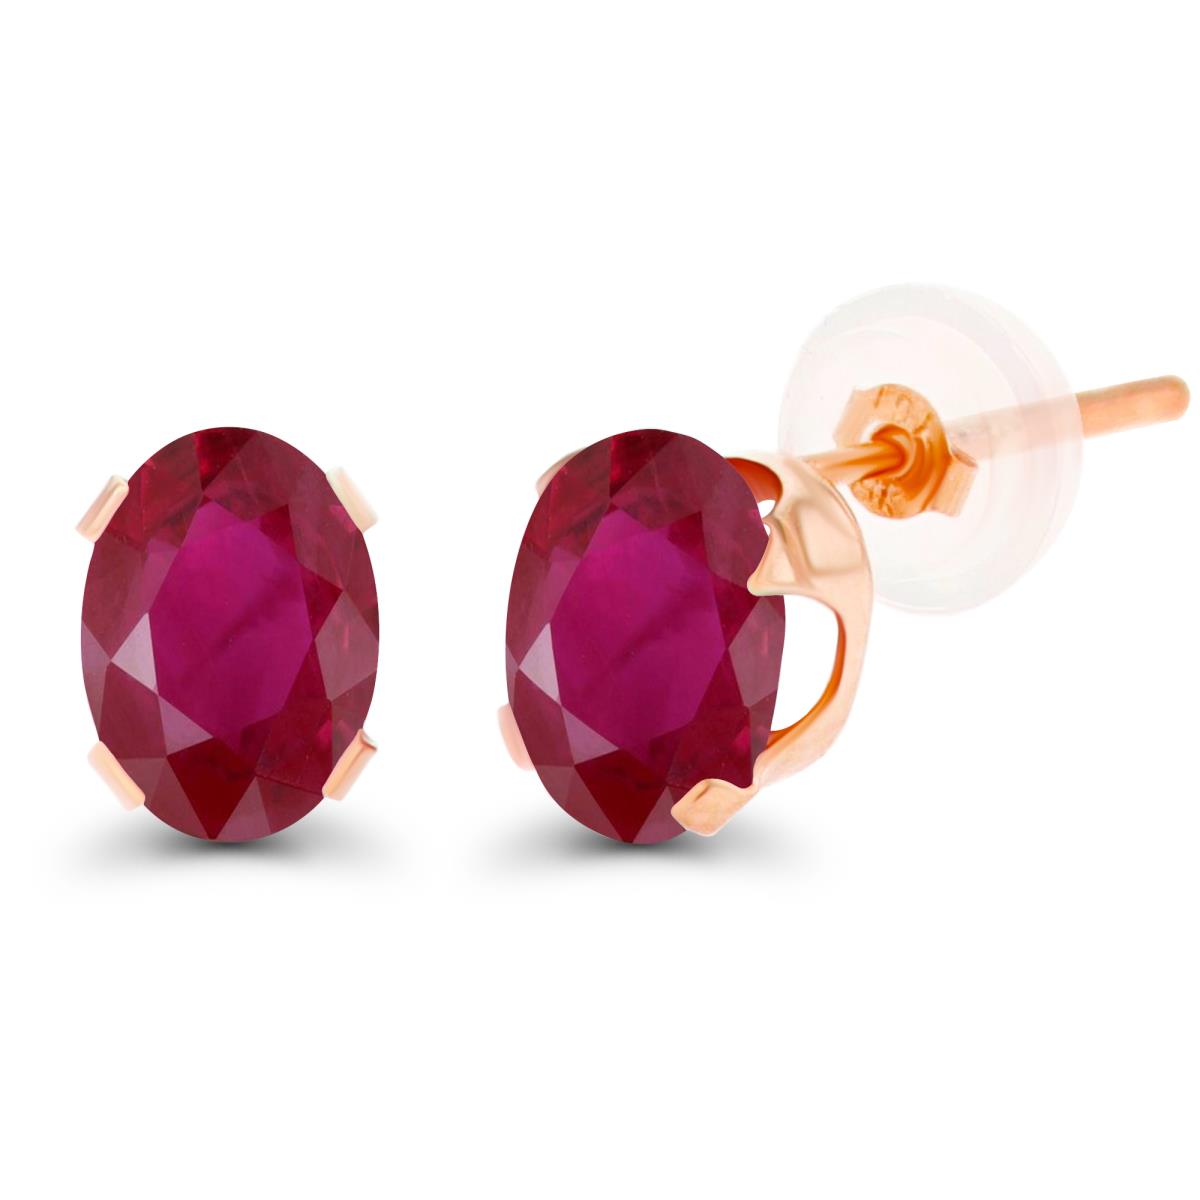 14K Rose Gold 7x5mm Oval Glass Filled Ruby Stud Earring with Silicone Back